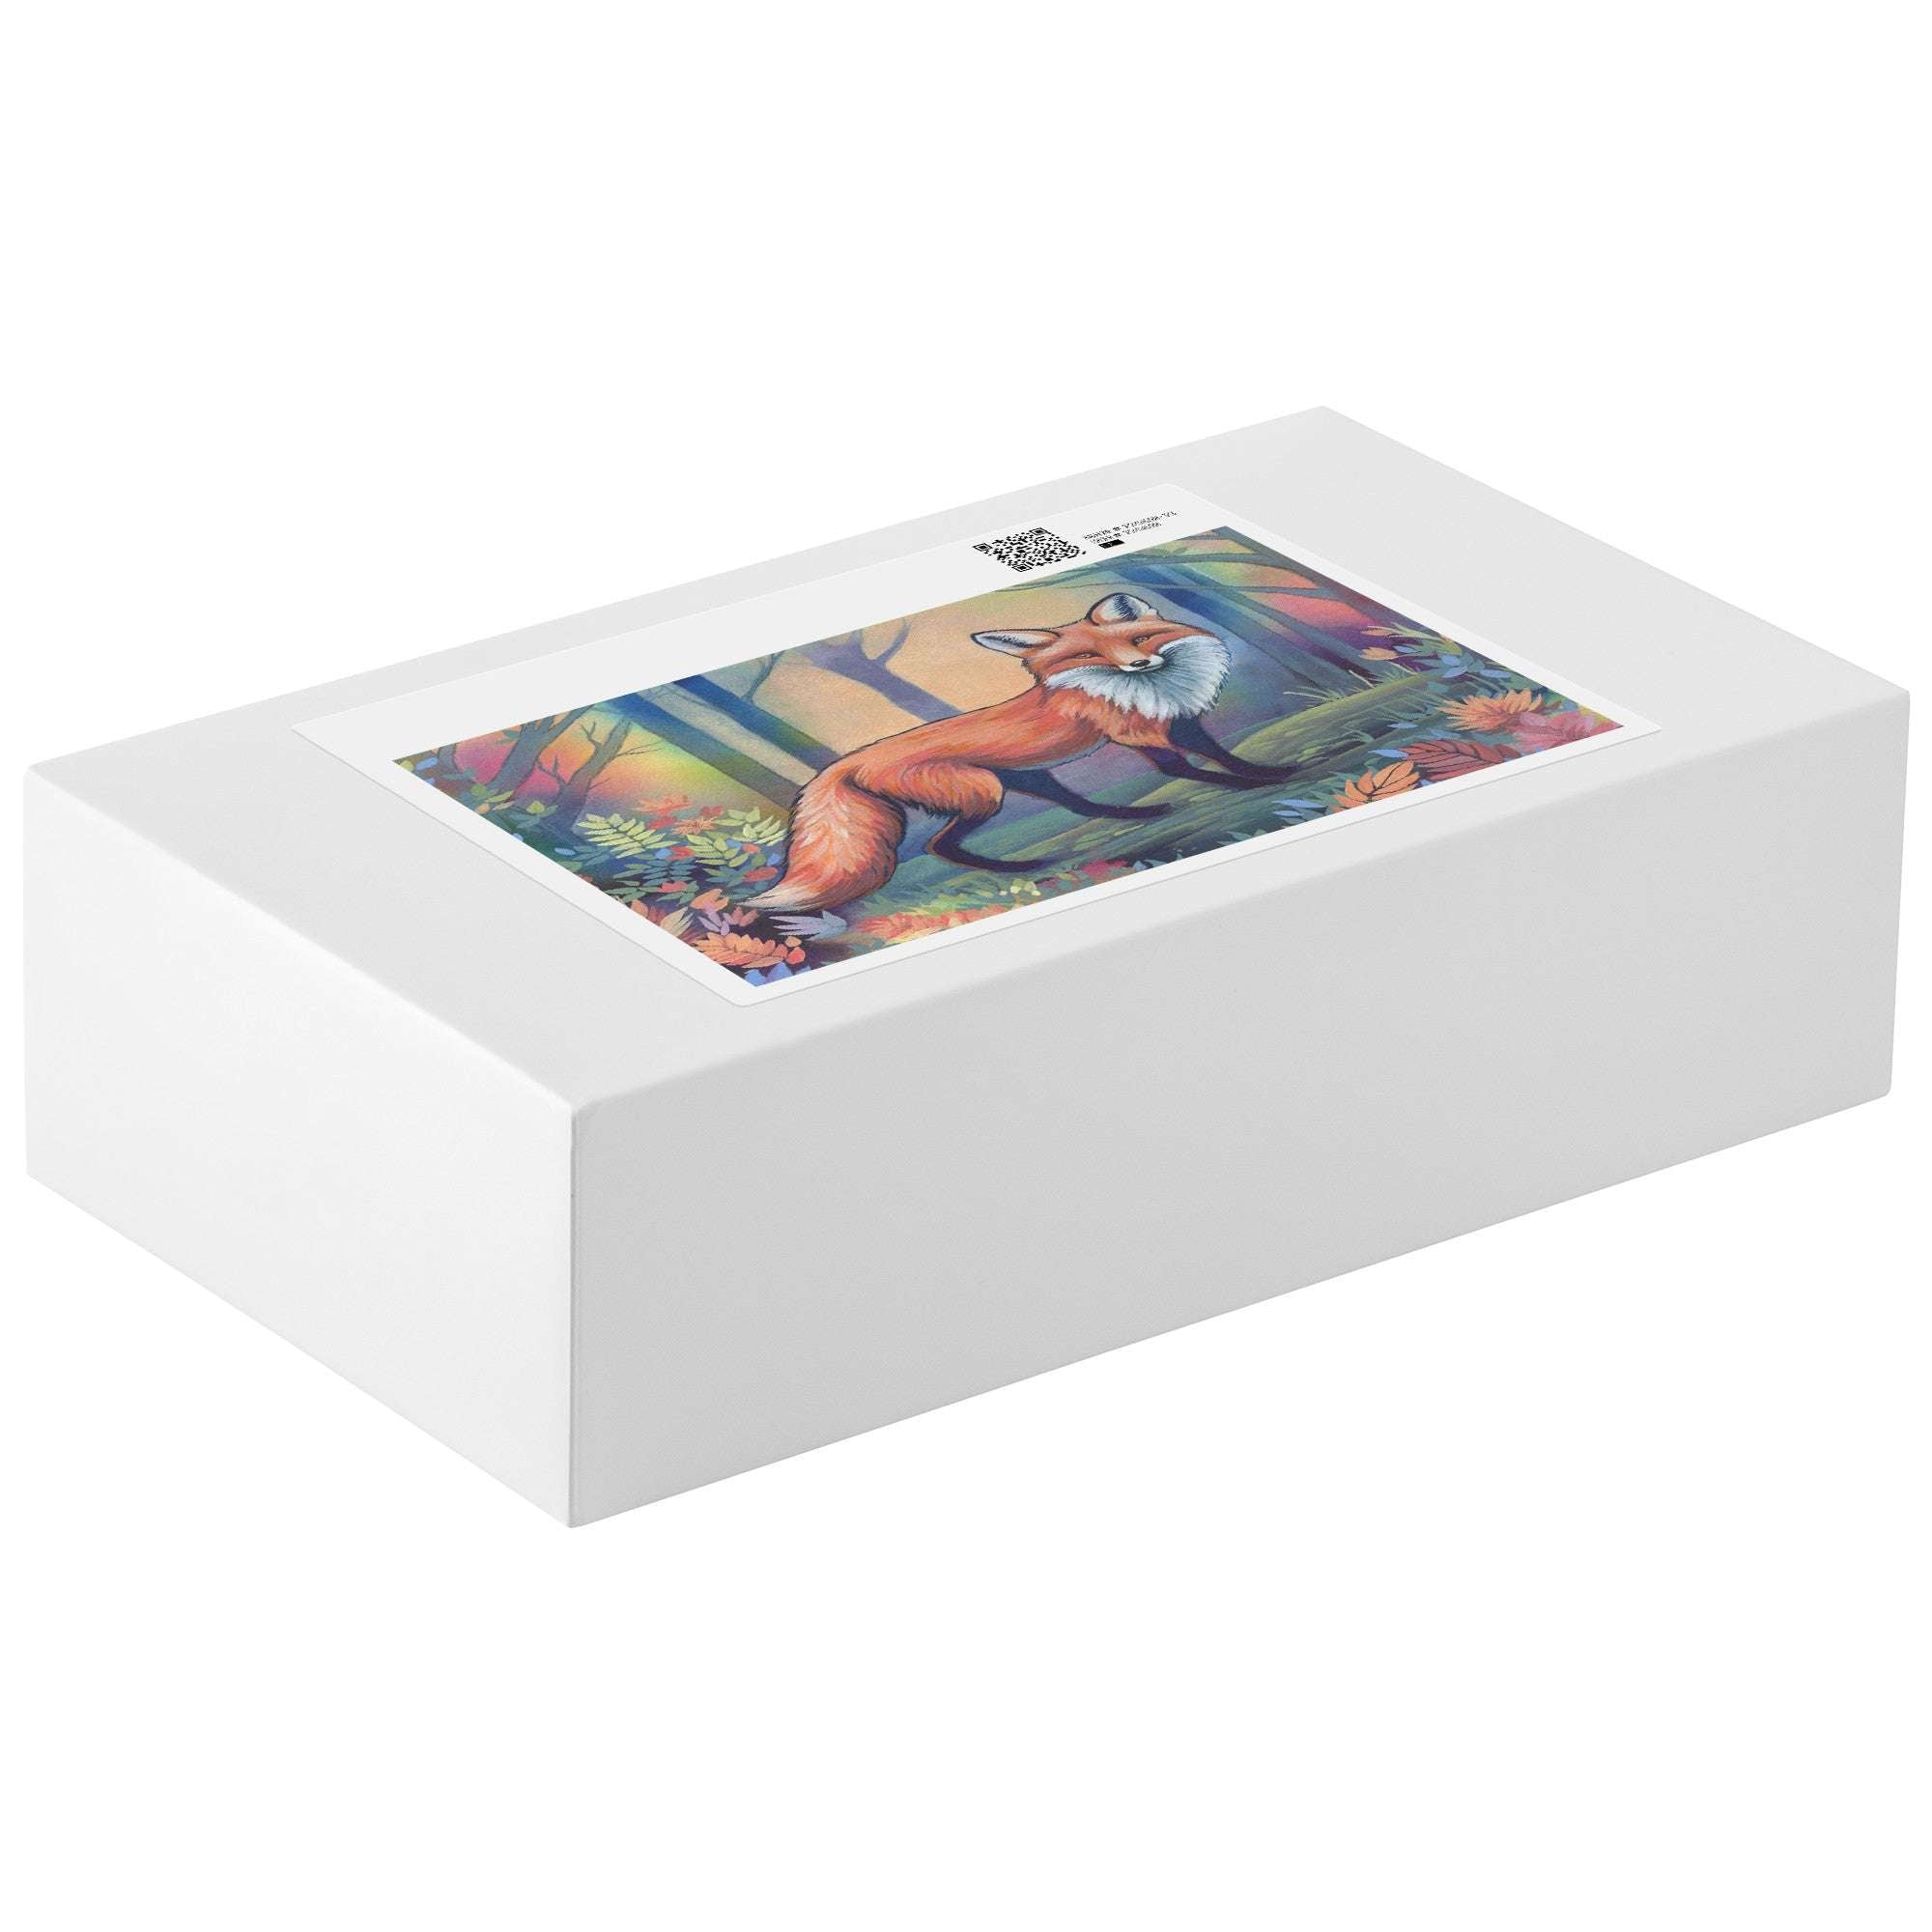 A white puzzle box displaying a vibrant illustration of the Fox Puzzle on it.